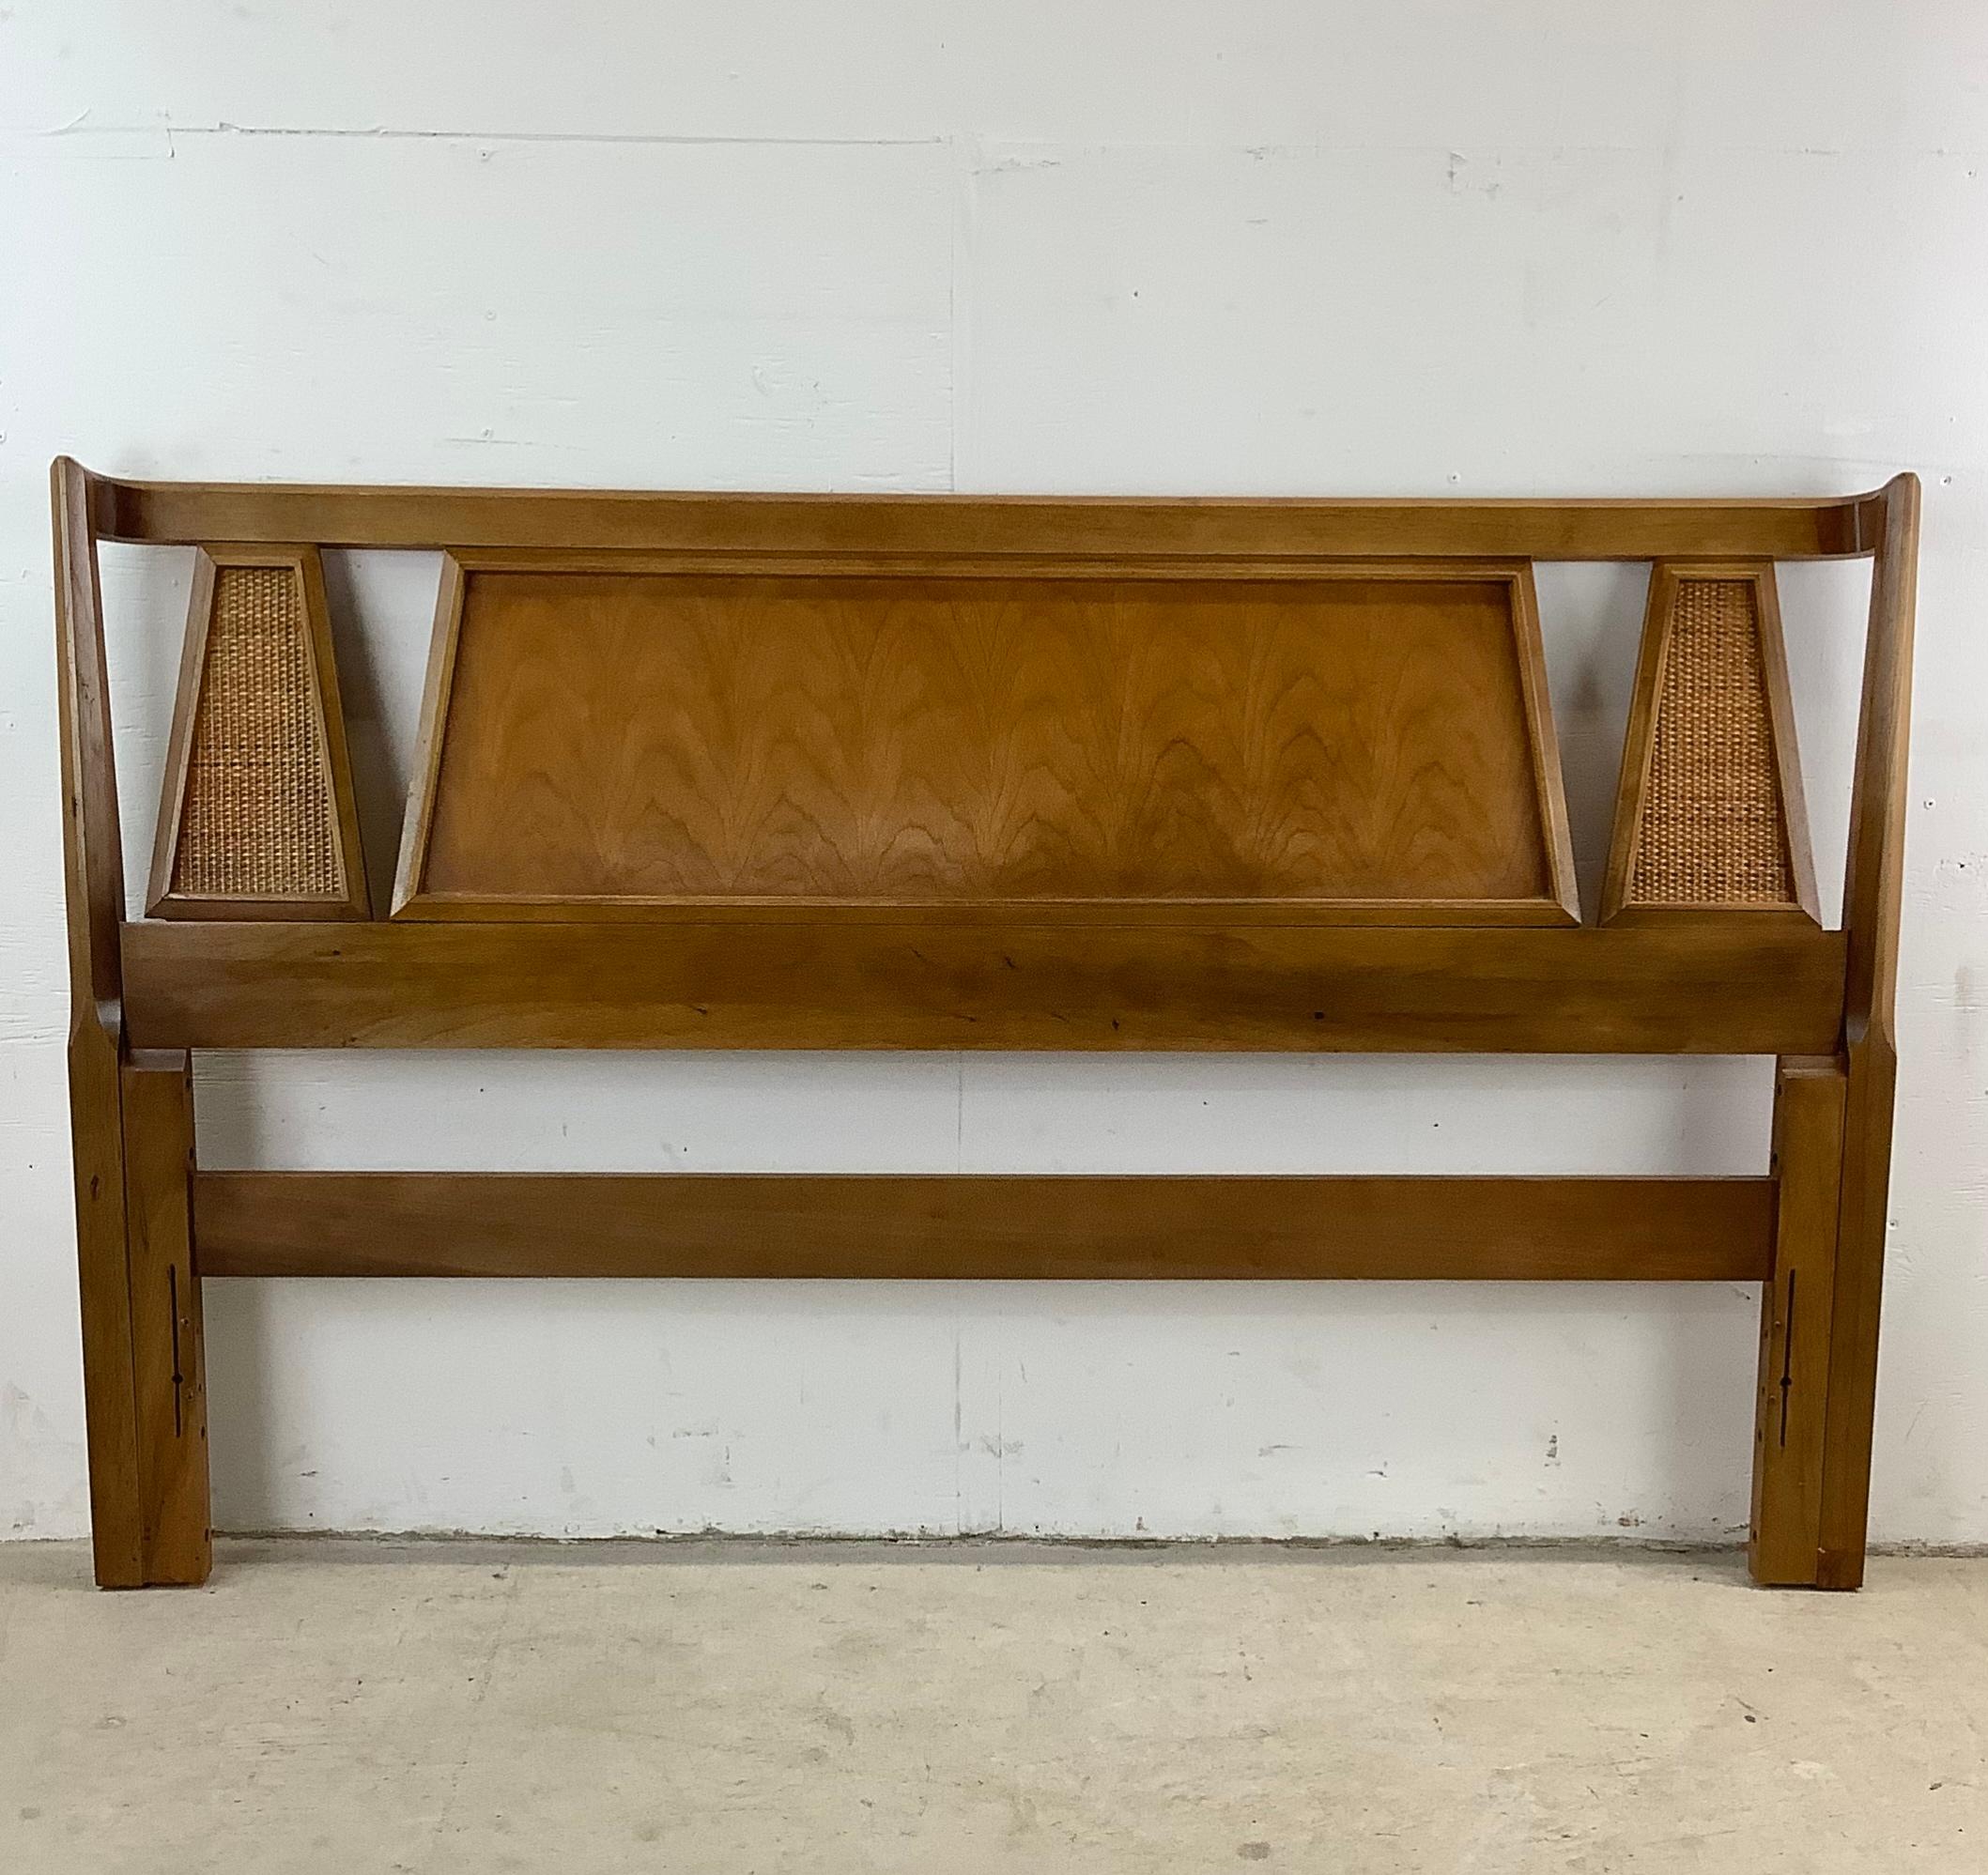 Step into a realm of vintage elegance with this mid-century walnut headboard, a masterpiece of design and craftsmanship. Crafted from rich walnut wood, this headboard brings a touch of classic mid-century modern aesthetics to your bedroom. Its clean